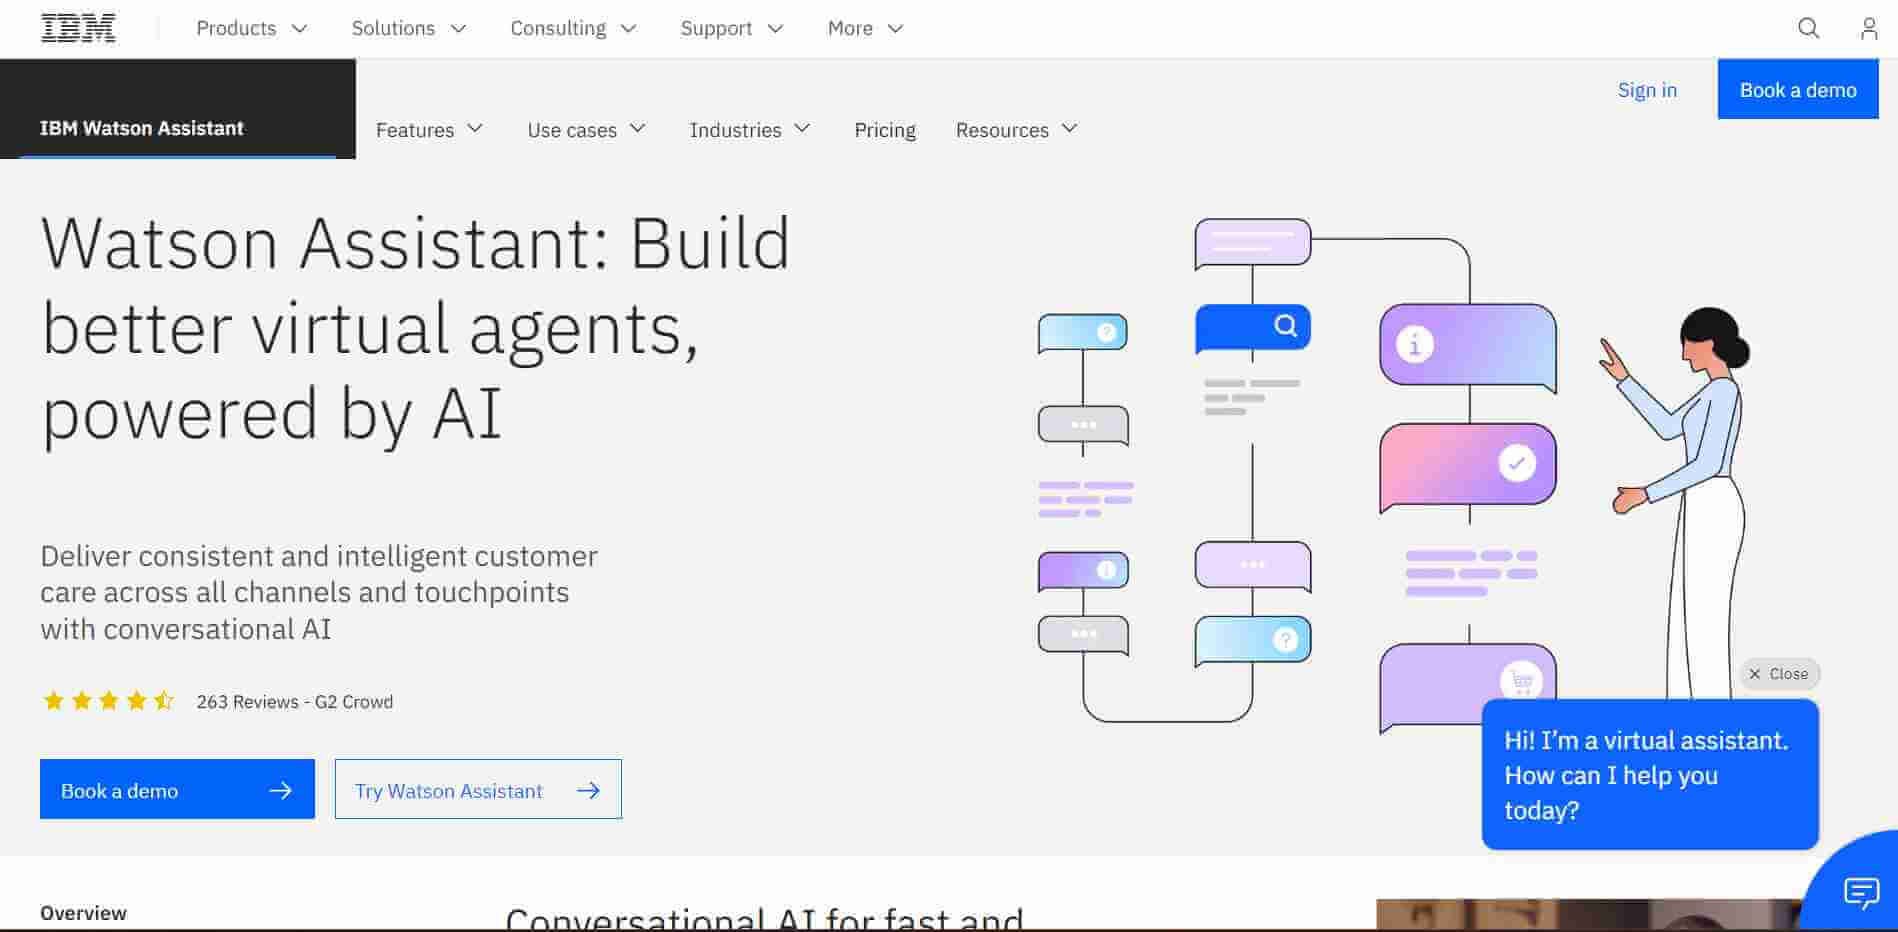 Watson Assistant: Build better virtual agents, powered by AI